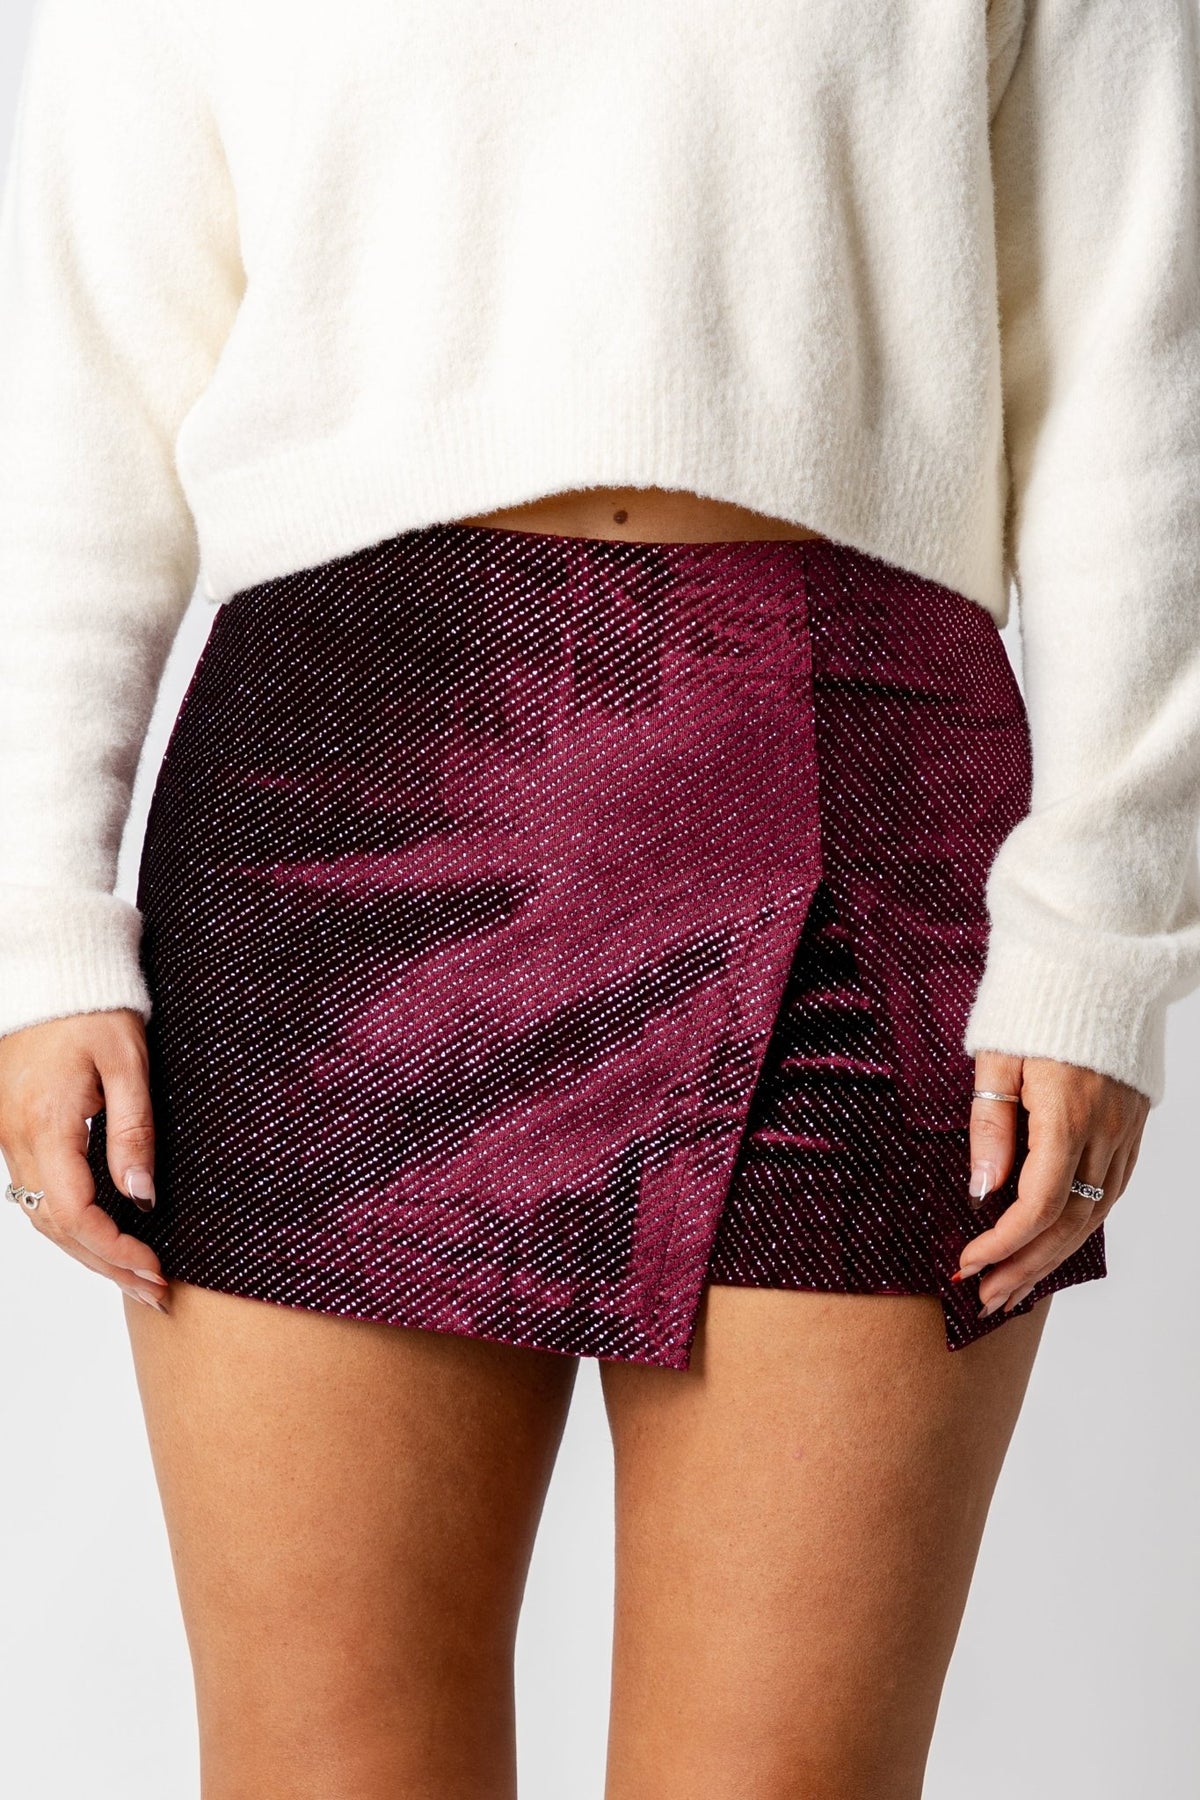 Front slit shimmer skort merlot - Trendy Holiday Apparel at Lush Fashion Lounge Boutique in Oklahoma City